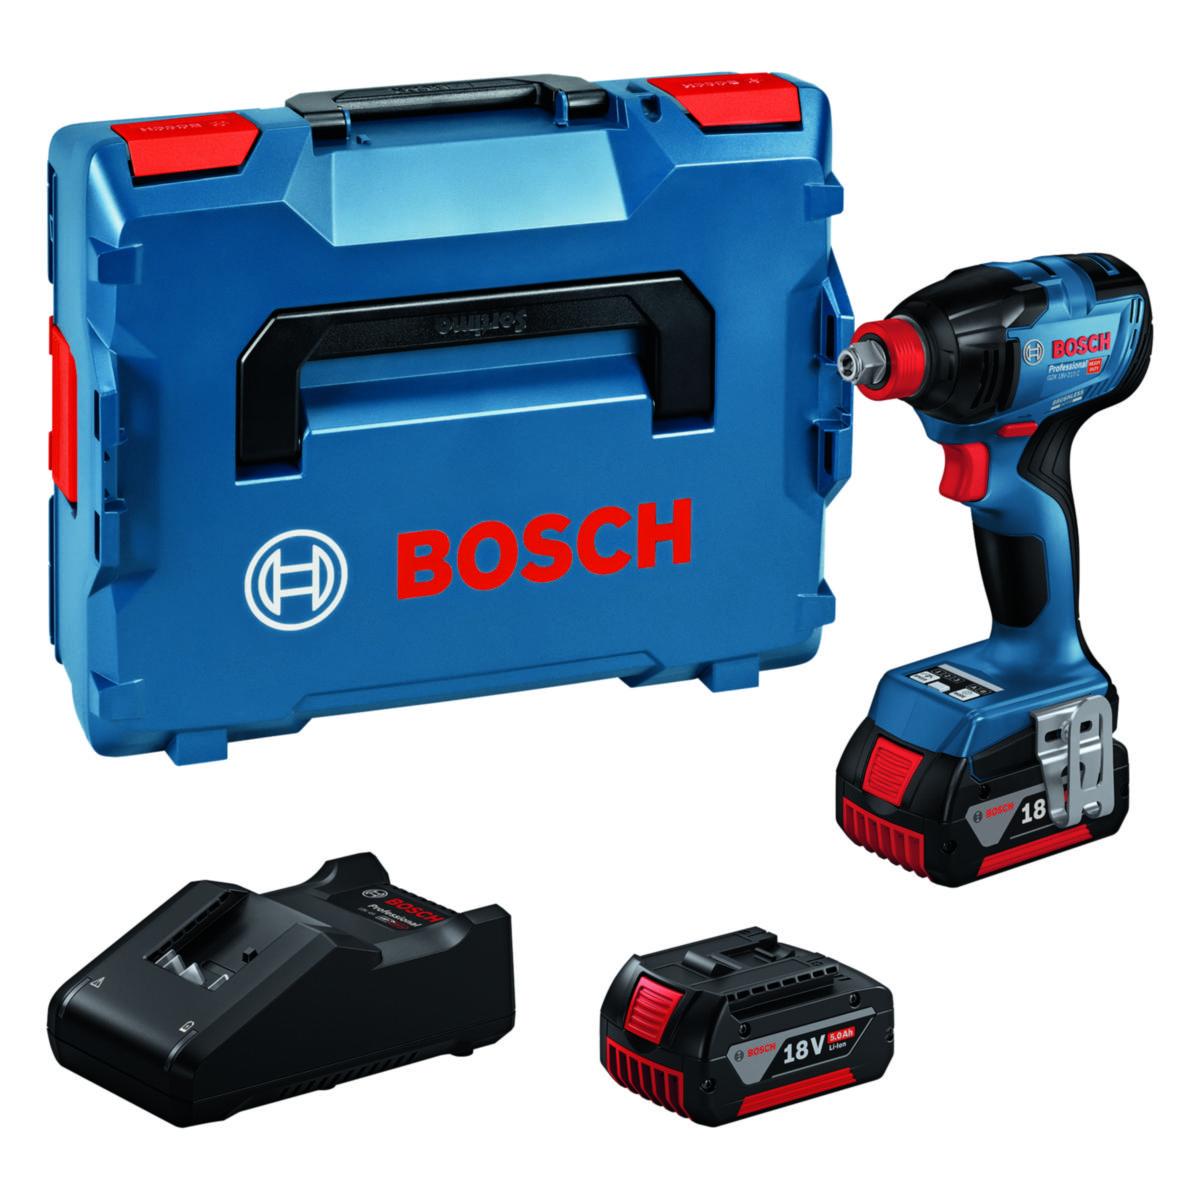 GDX 18V-210 C NEW BOSCH cordless impact driver with integrated Bluetooth  connectivity 